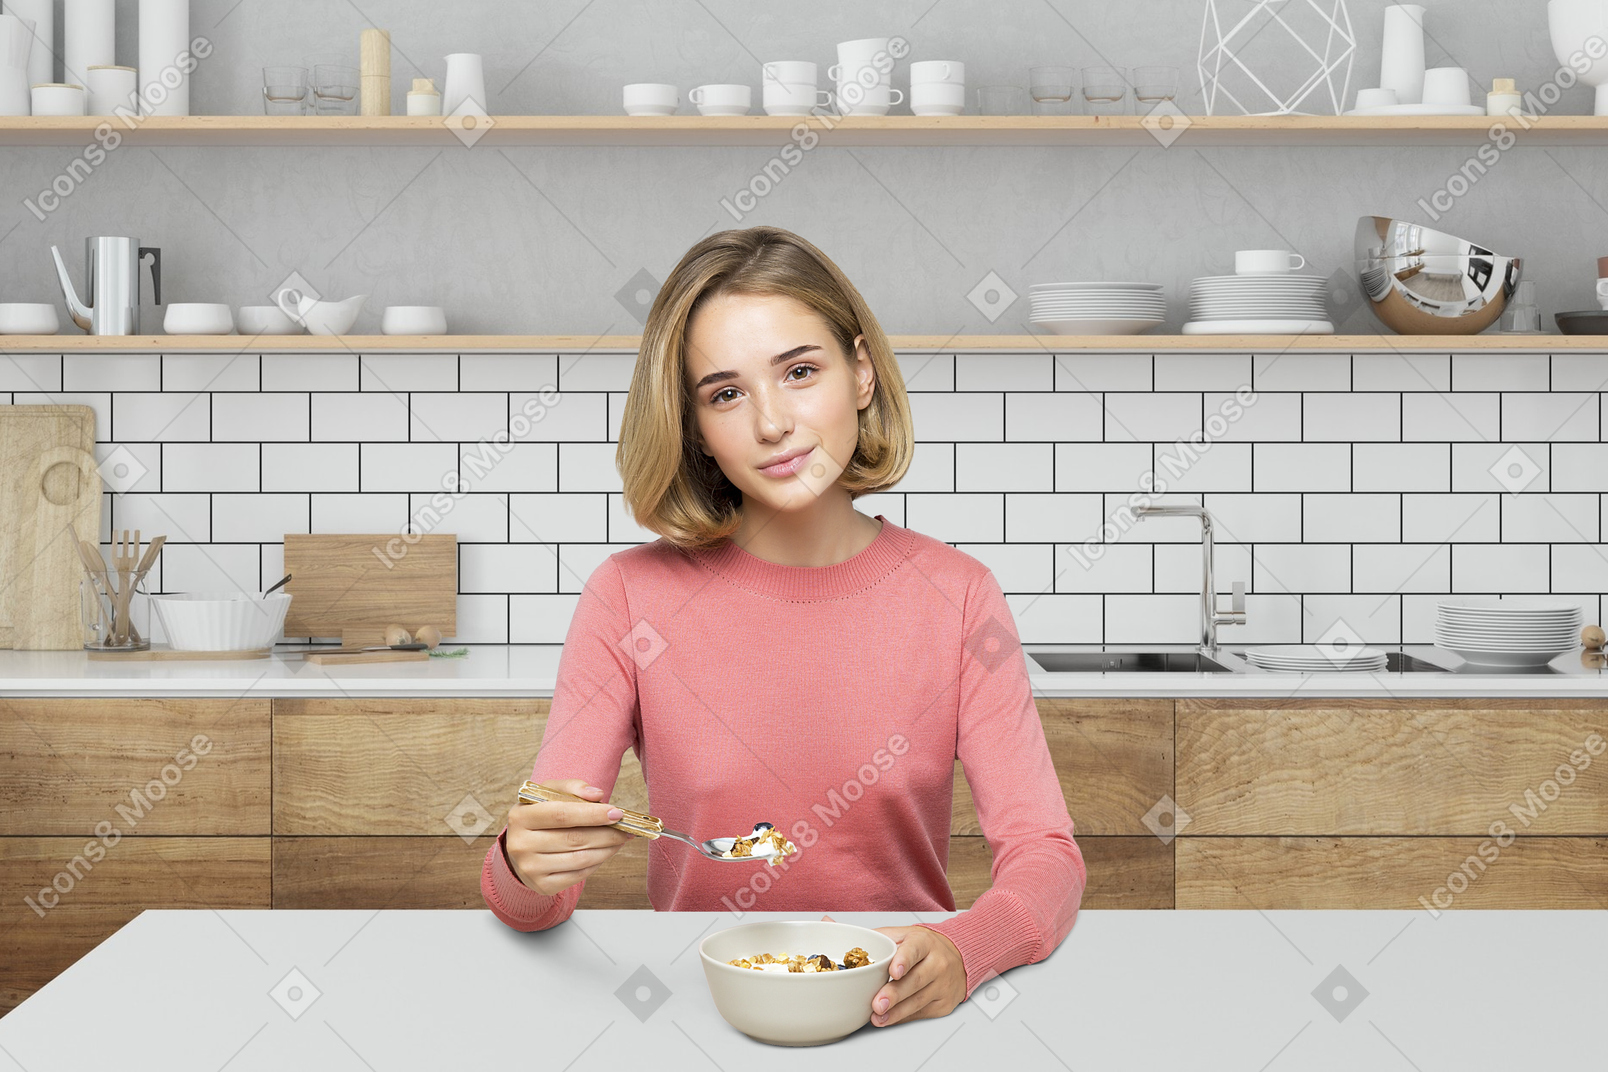 A woman sitting at a table with a bowl of cereal